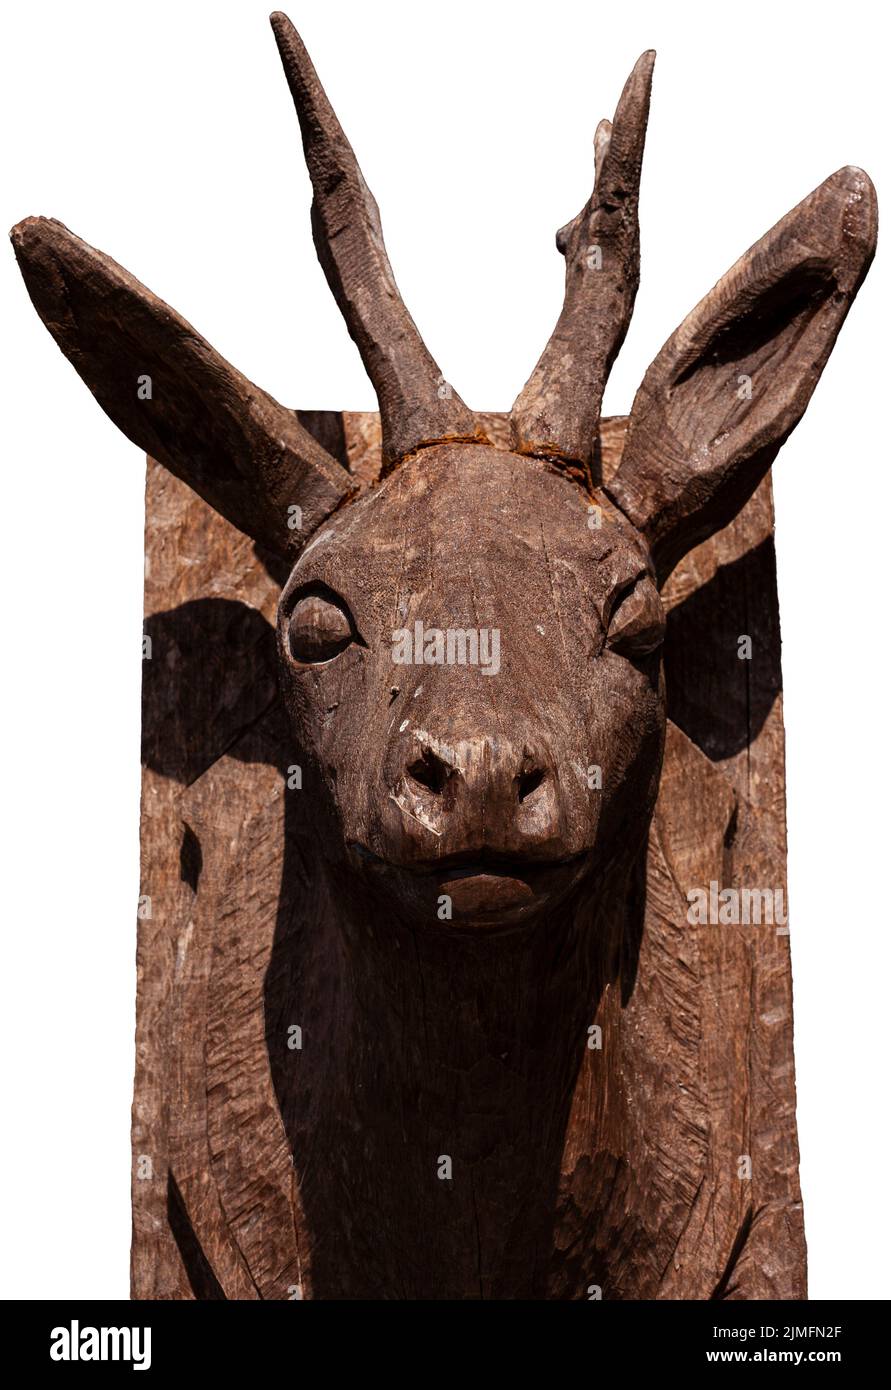 Head of a deer made from wood isolated on white background Stock Photo